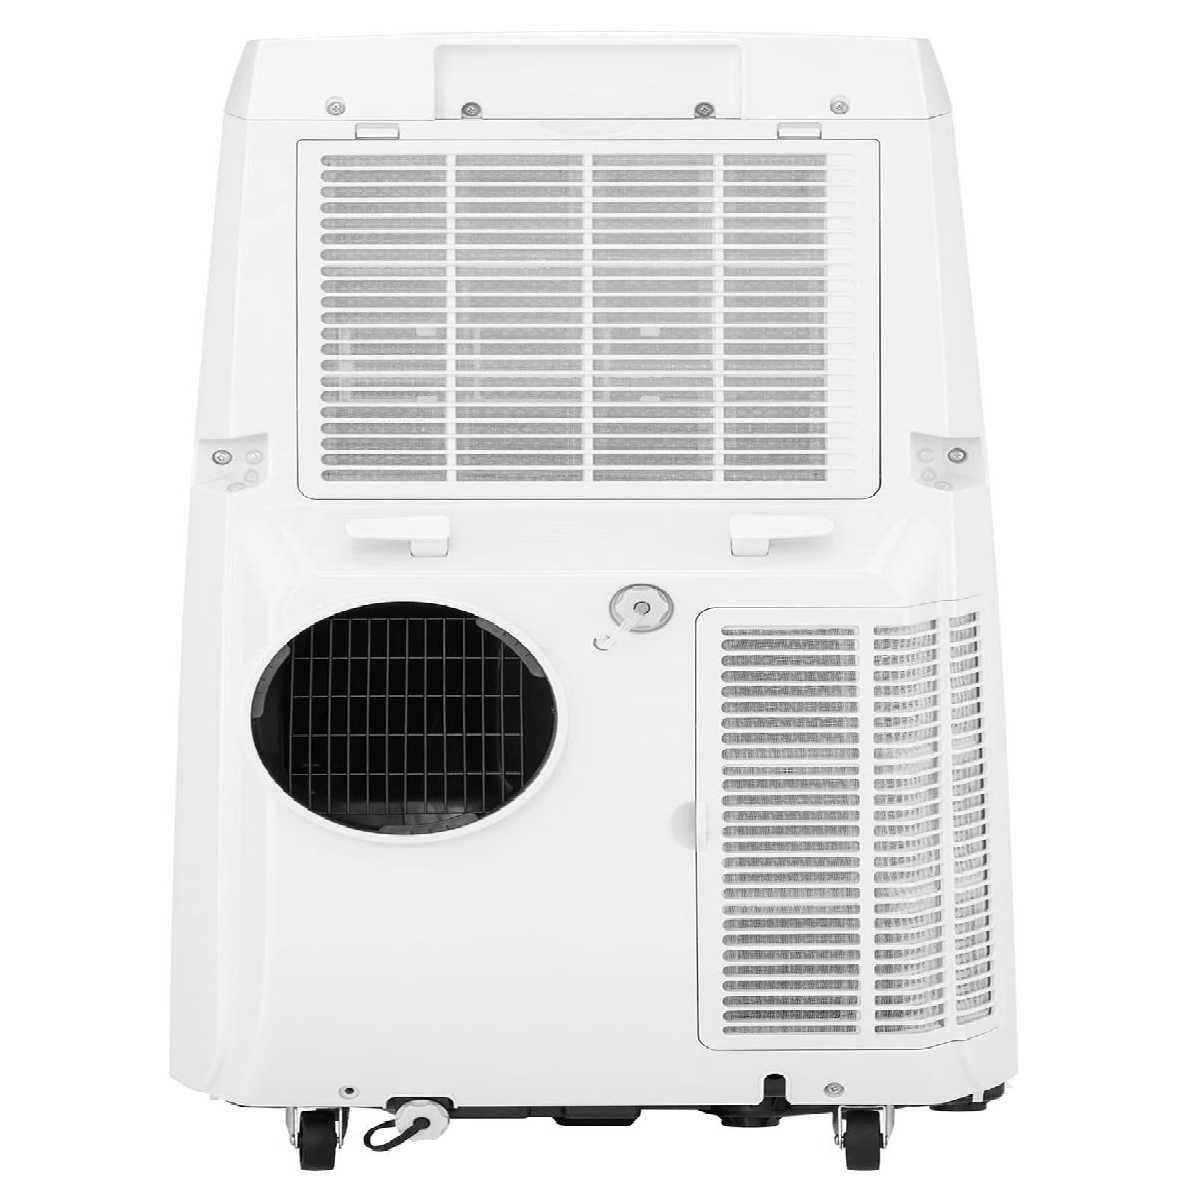 LG portable air conditioner not cooling